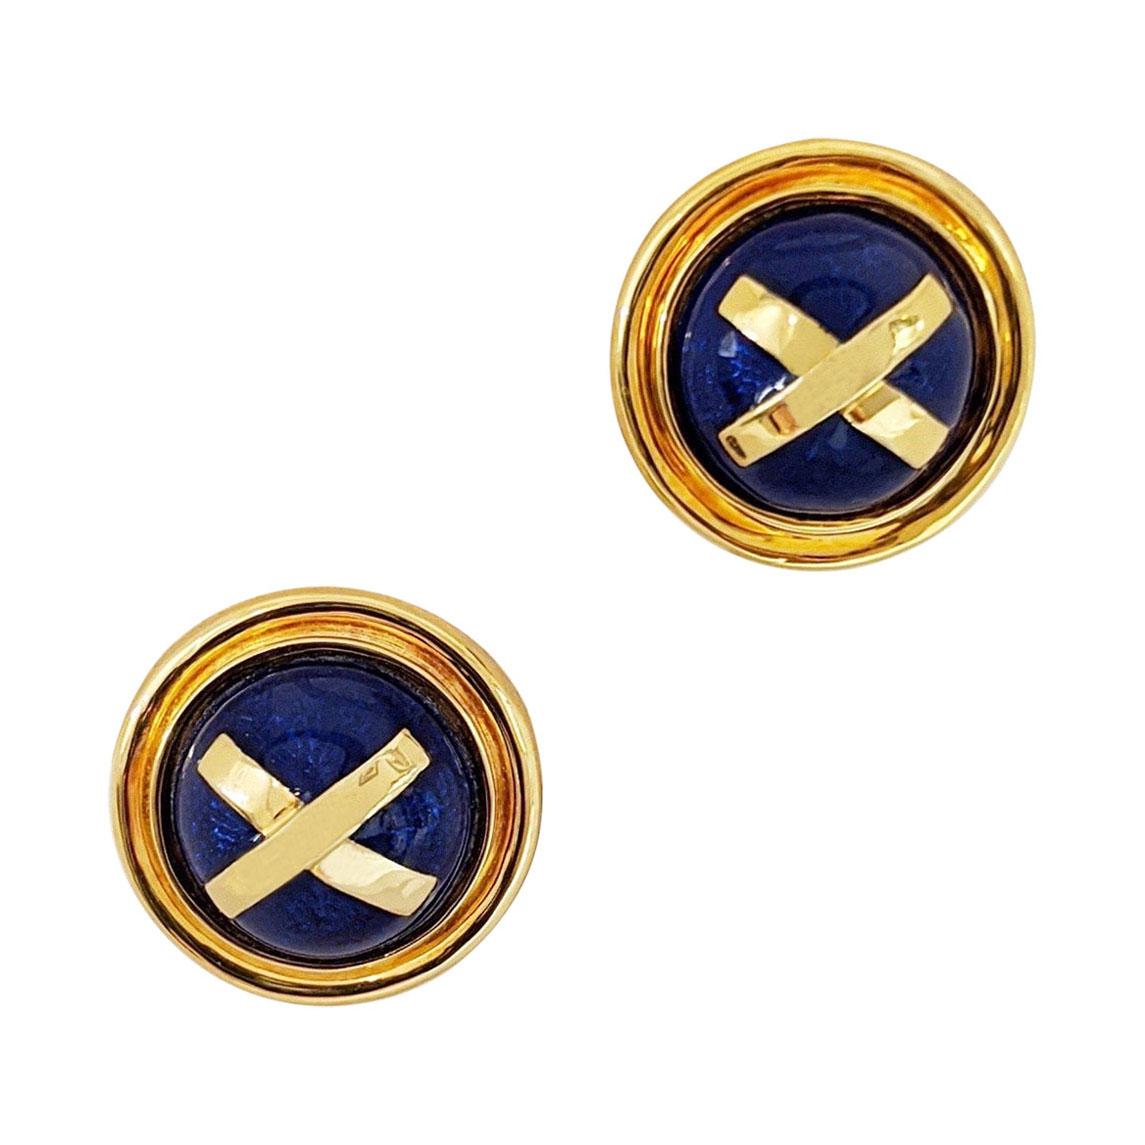 Cellini Jewelers 18 Karat Gold Earrings with Blue Enamel and Yellow Gold "X"